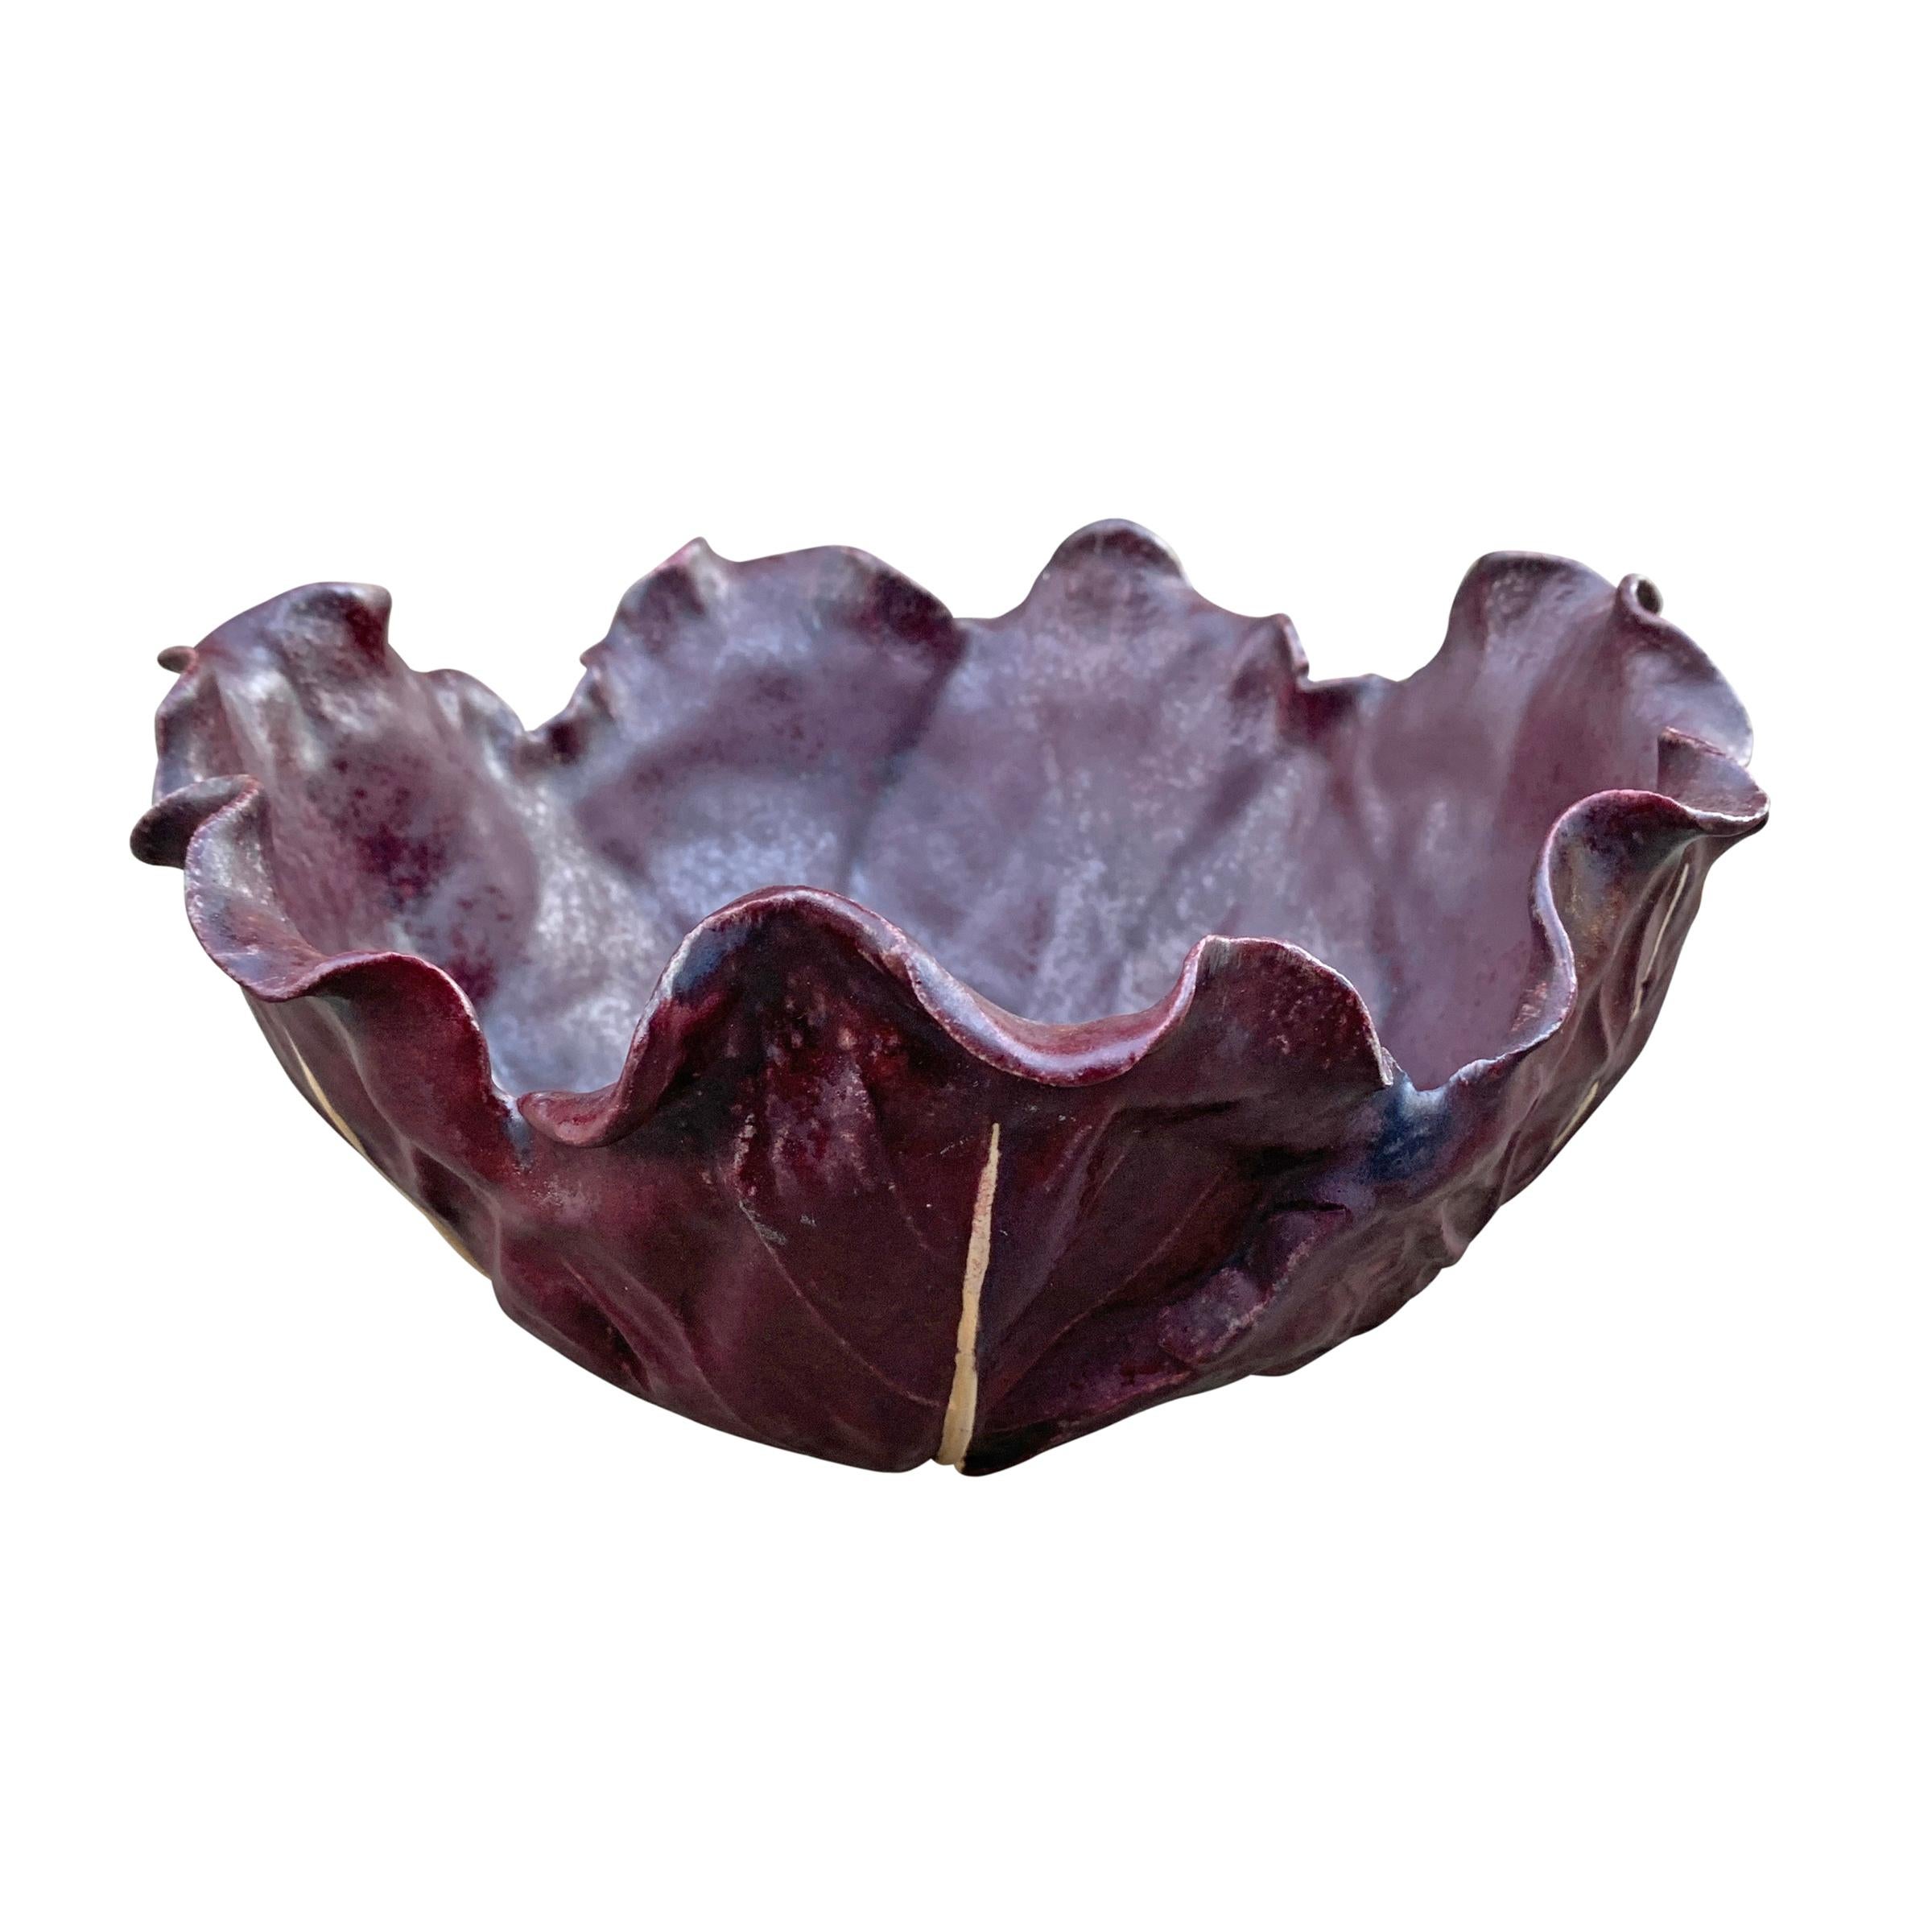 Hand-Crafted Vintage Hand-Built Ceramic Red Cabbage Bowl